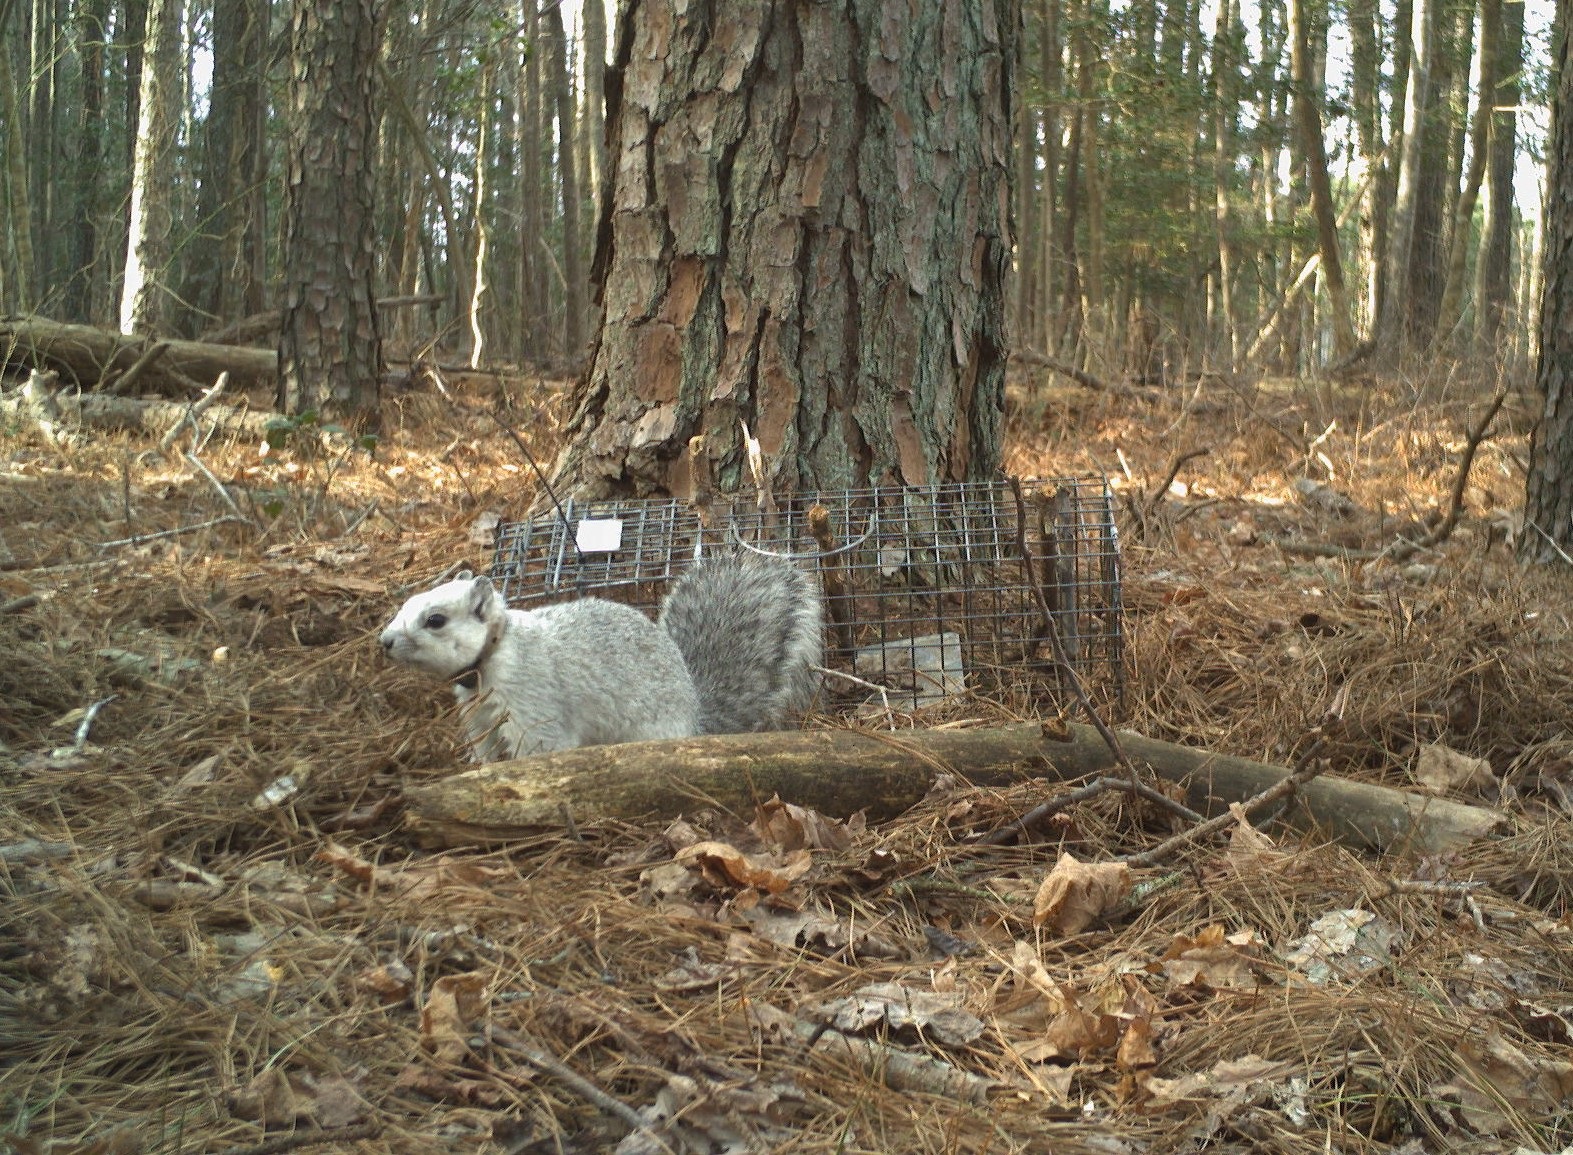 Delaware Actually Imports Fluffier Squirrels. Here's Why